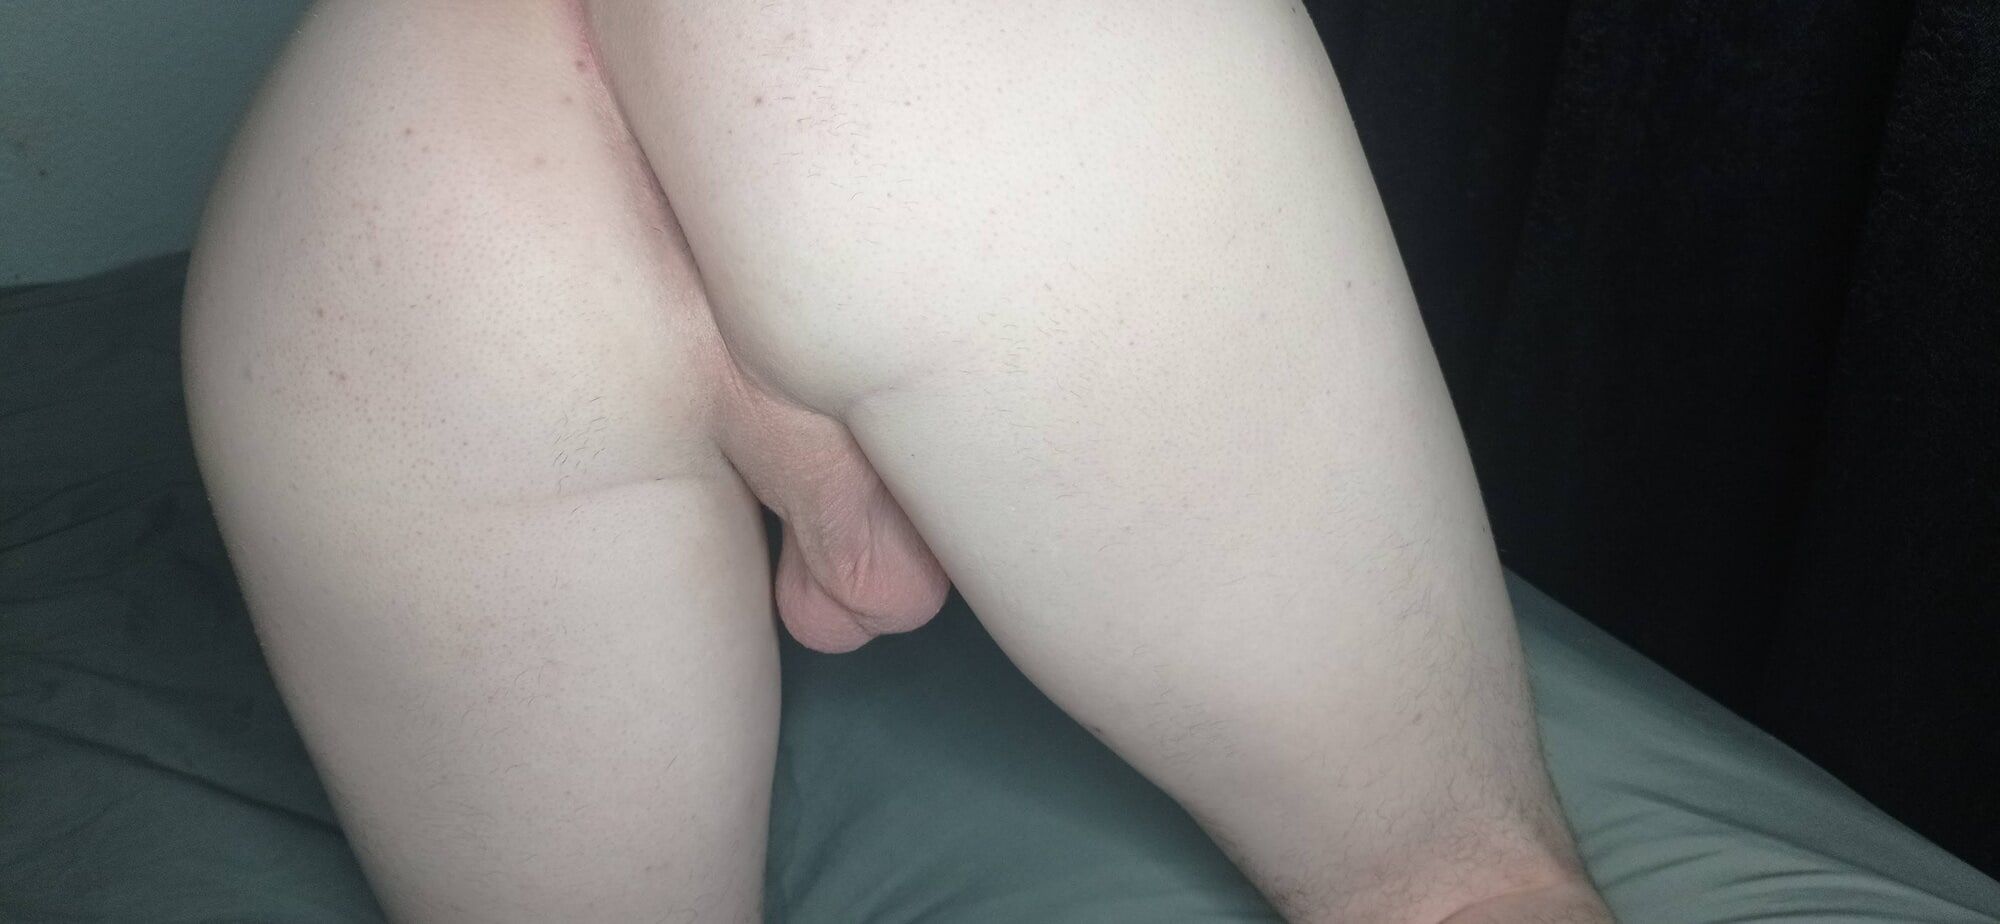 twink femboy ass and thong pics #7